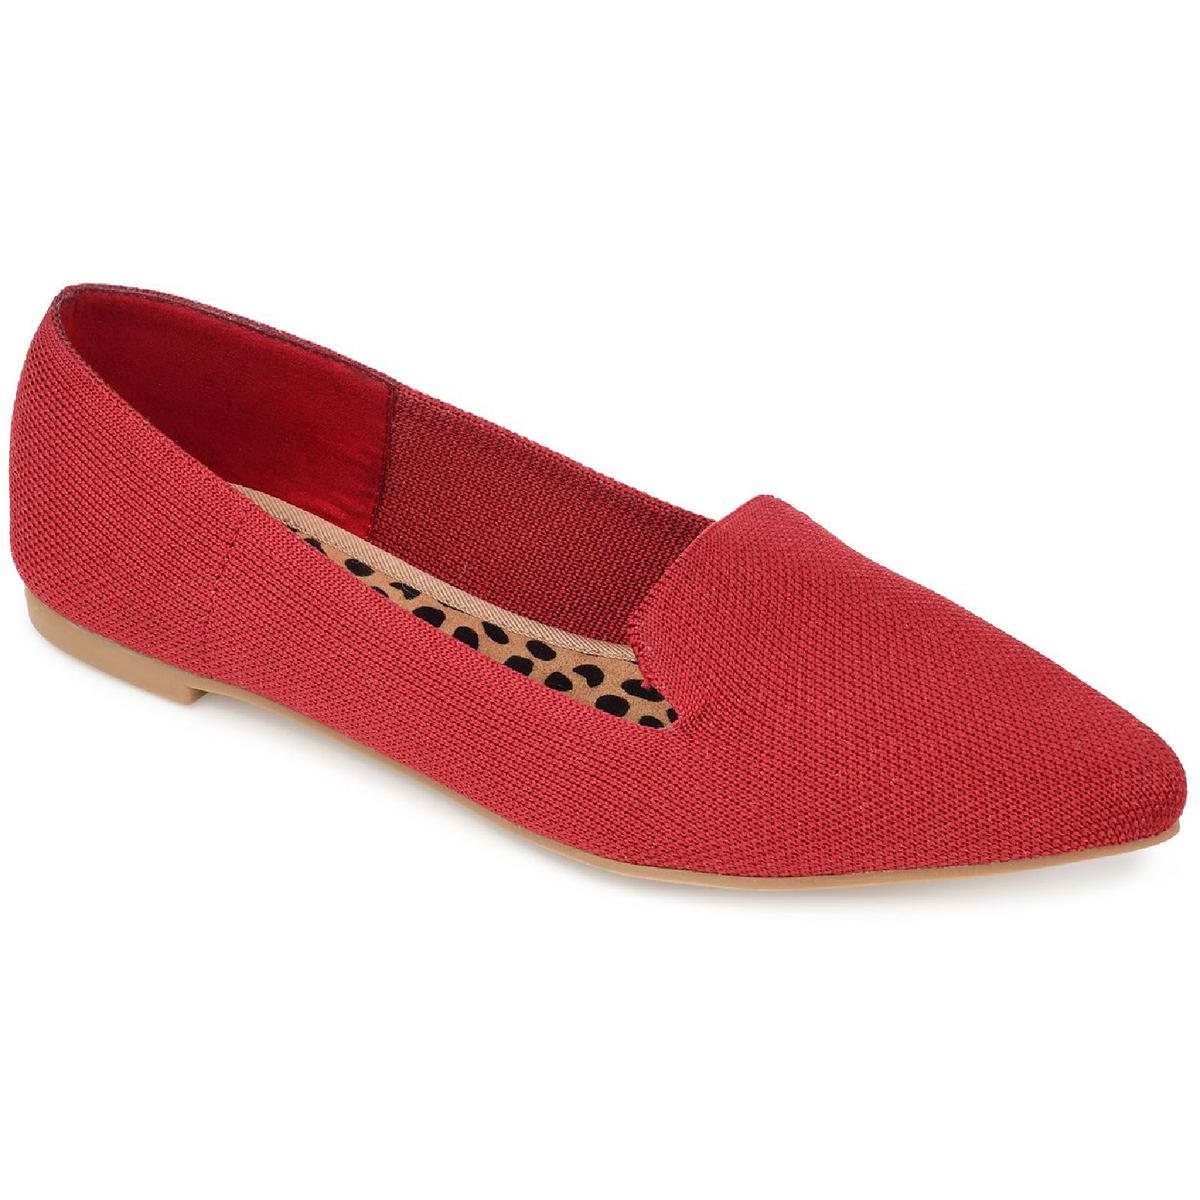 Journee Collection Vickie Womens Knit Slip On Loafers